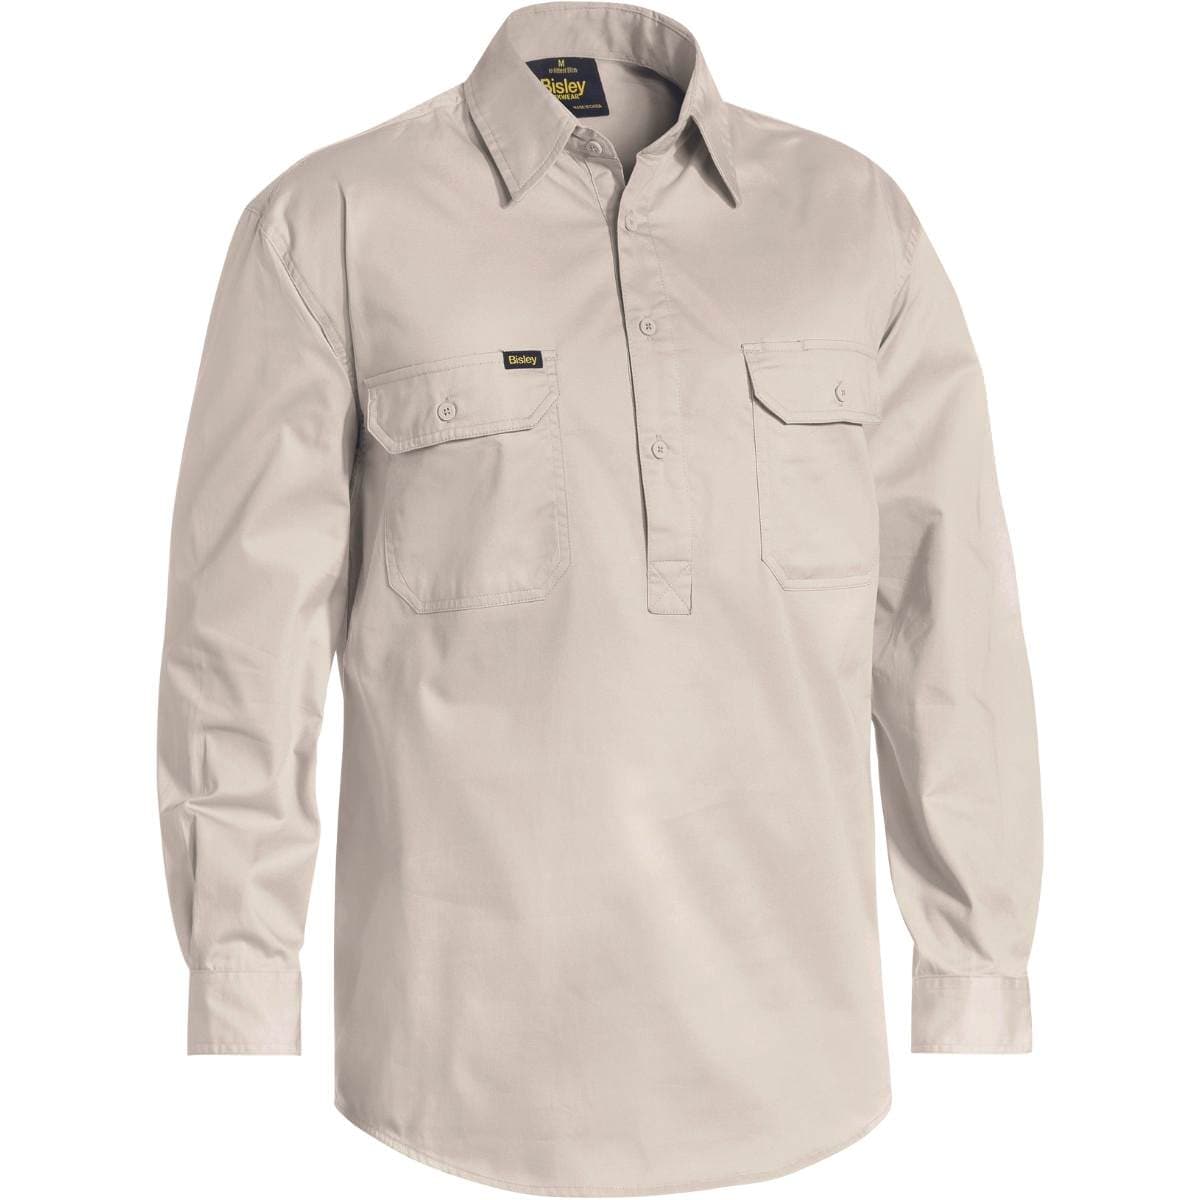 Bisley Closed Front Cool Lightweight Drill Shirt BSC6820